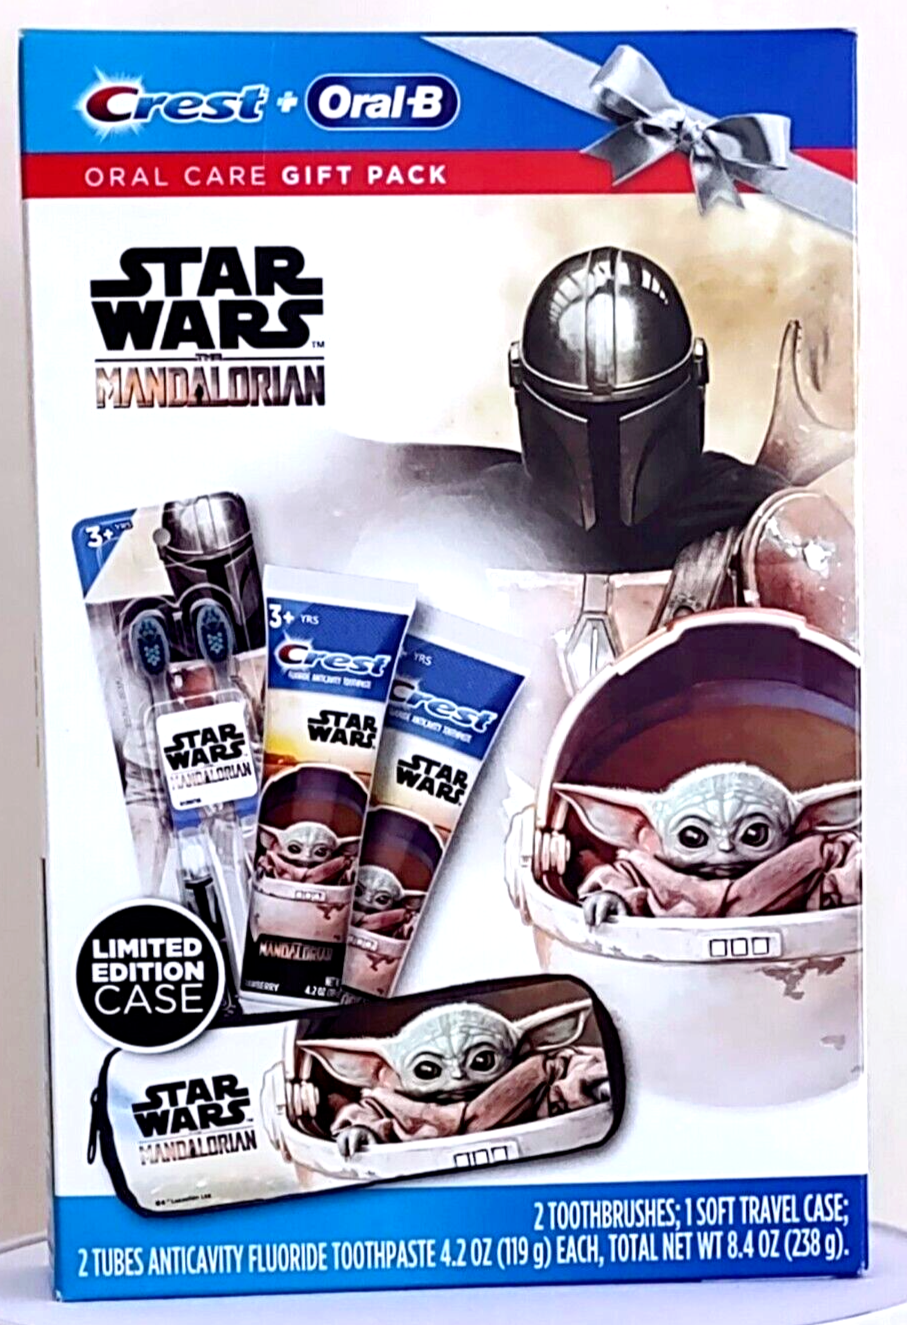 Crest Oral B Star Wars Mandalorian Oral Care Gift Pack Grogu Baby Yoda with Case - $15.44